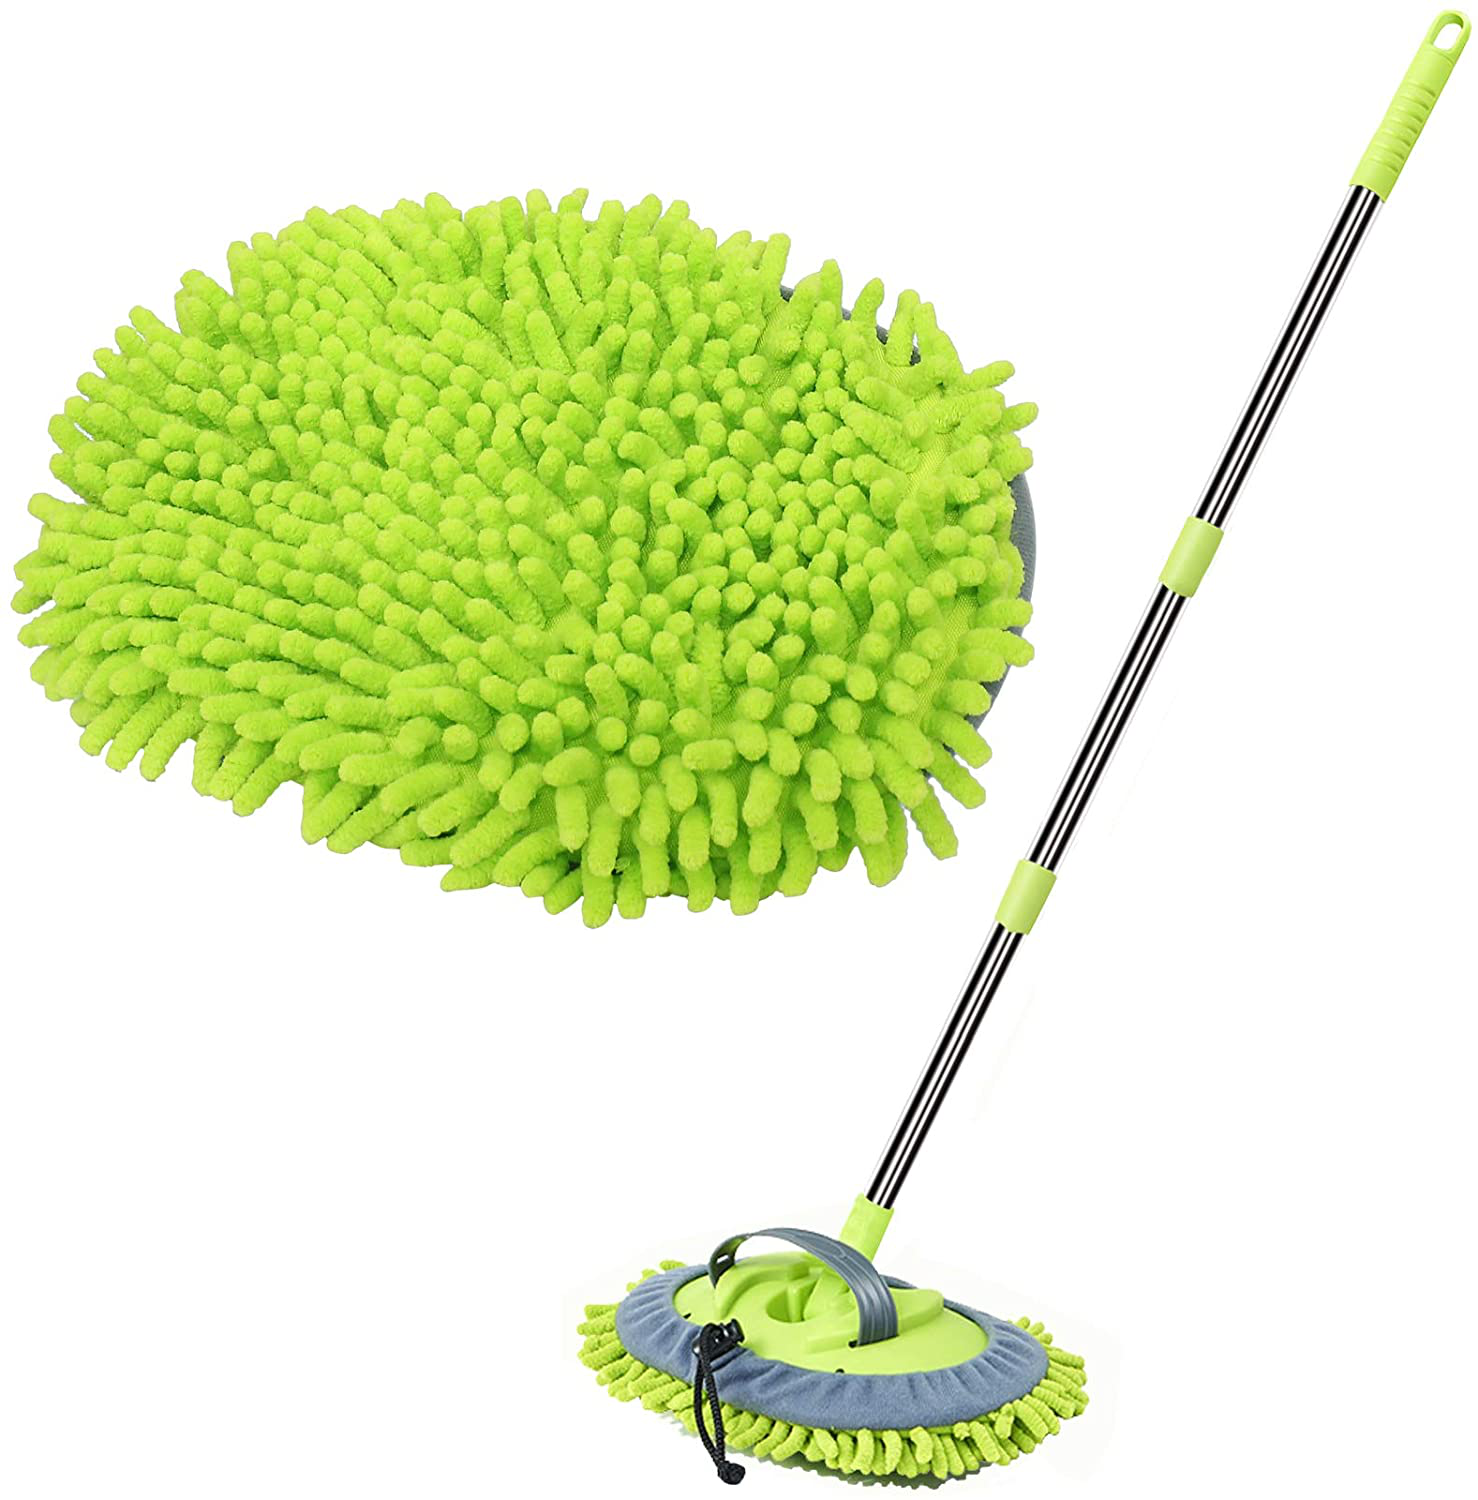 WillingHeart 47.5" Car Wash Brush Mop Cleaning Tool with Long Handle Kit for Washing Detailing Cars Truck, SUV, RV, Trailer, Boat 2 in 1 Chenille Microfiber Sponge Duster Not Hurt Paint Scratch Free